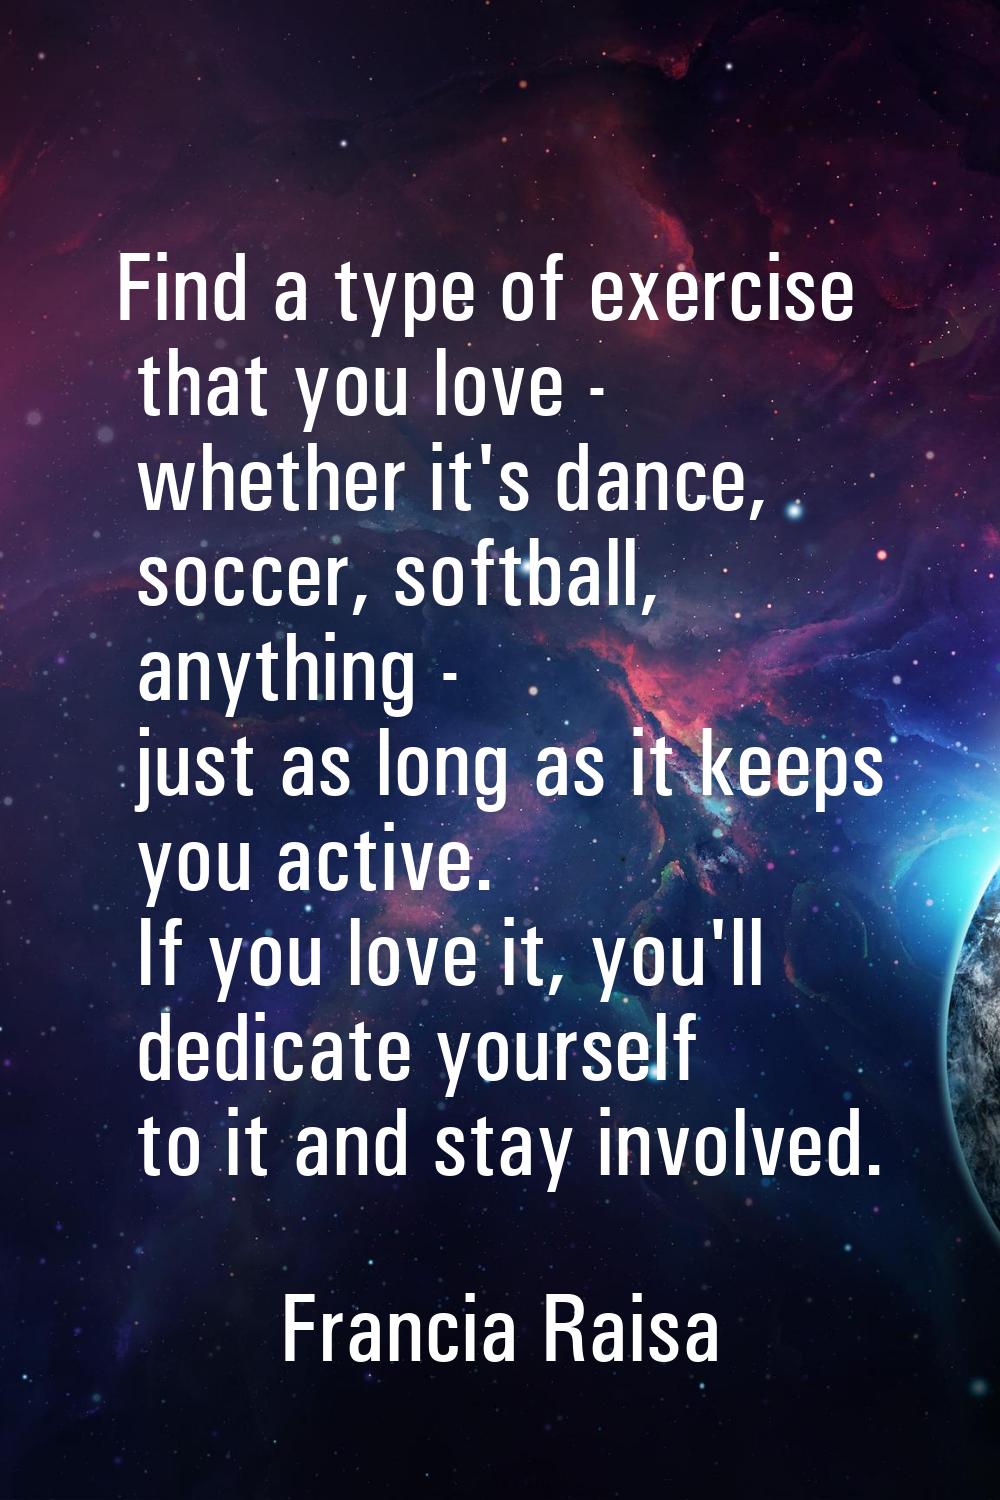 Find a type of exercise that you love - whether it's dance, soccer, softball, anything - just as lo